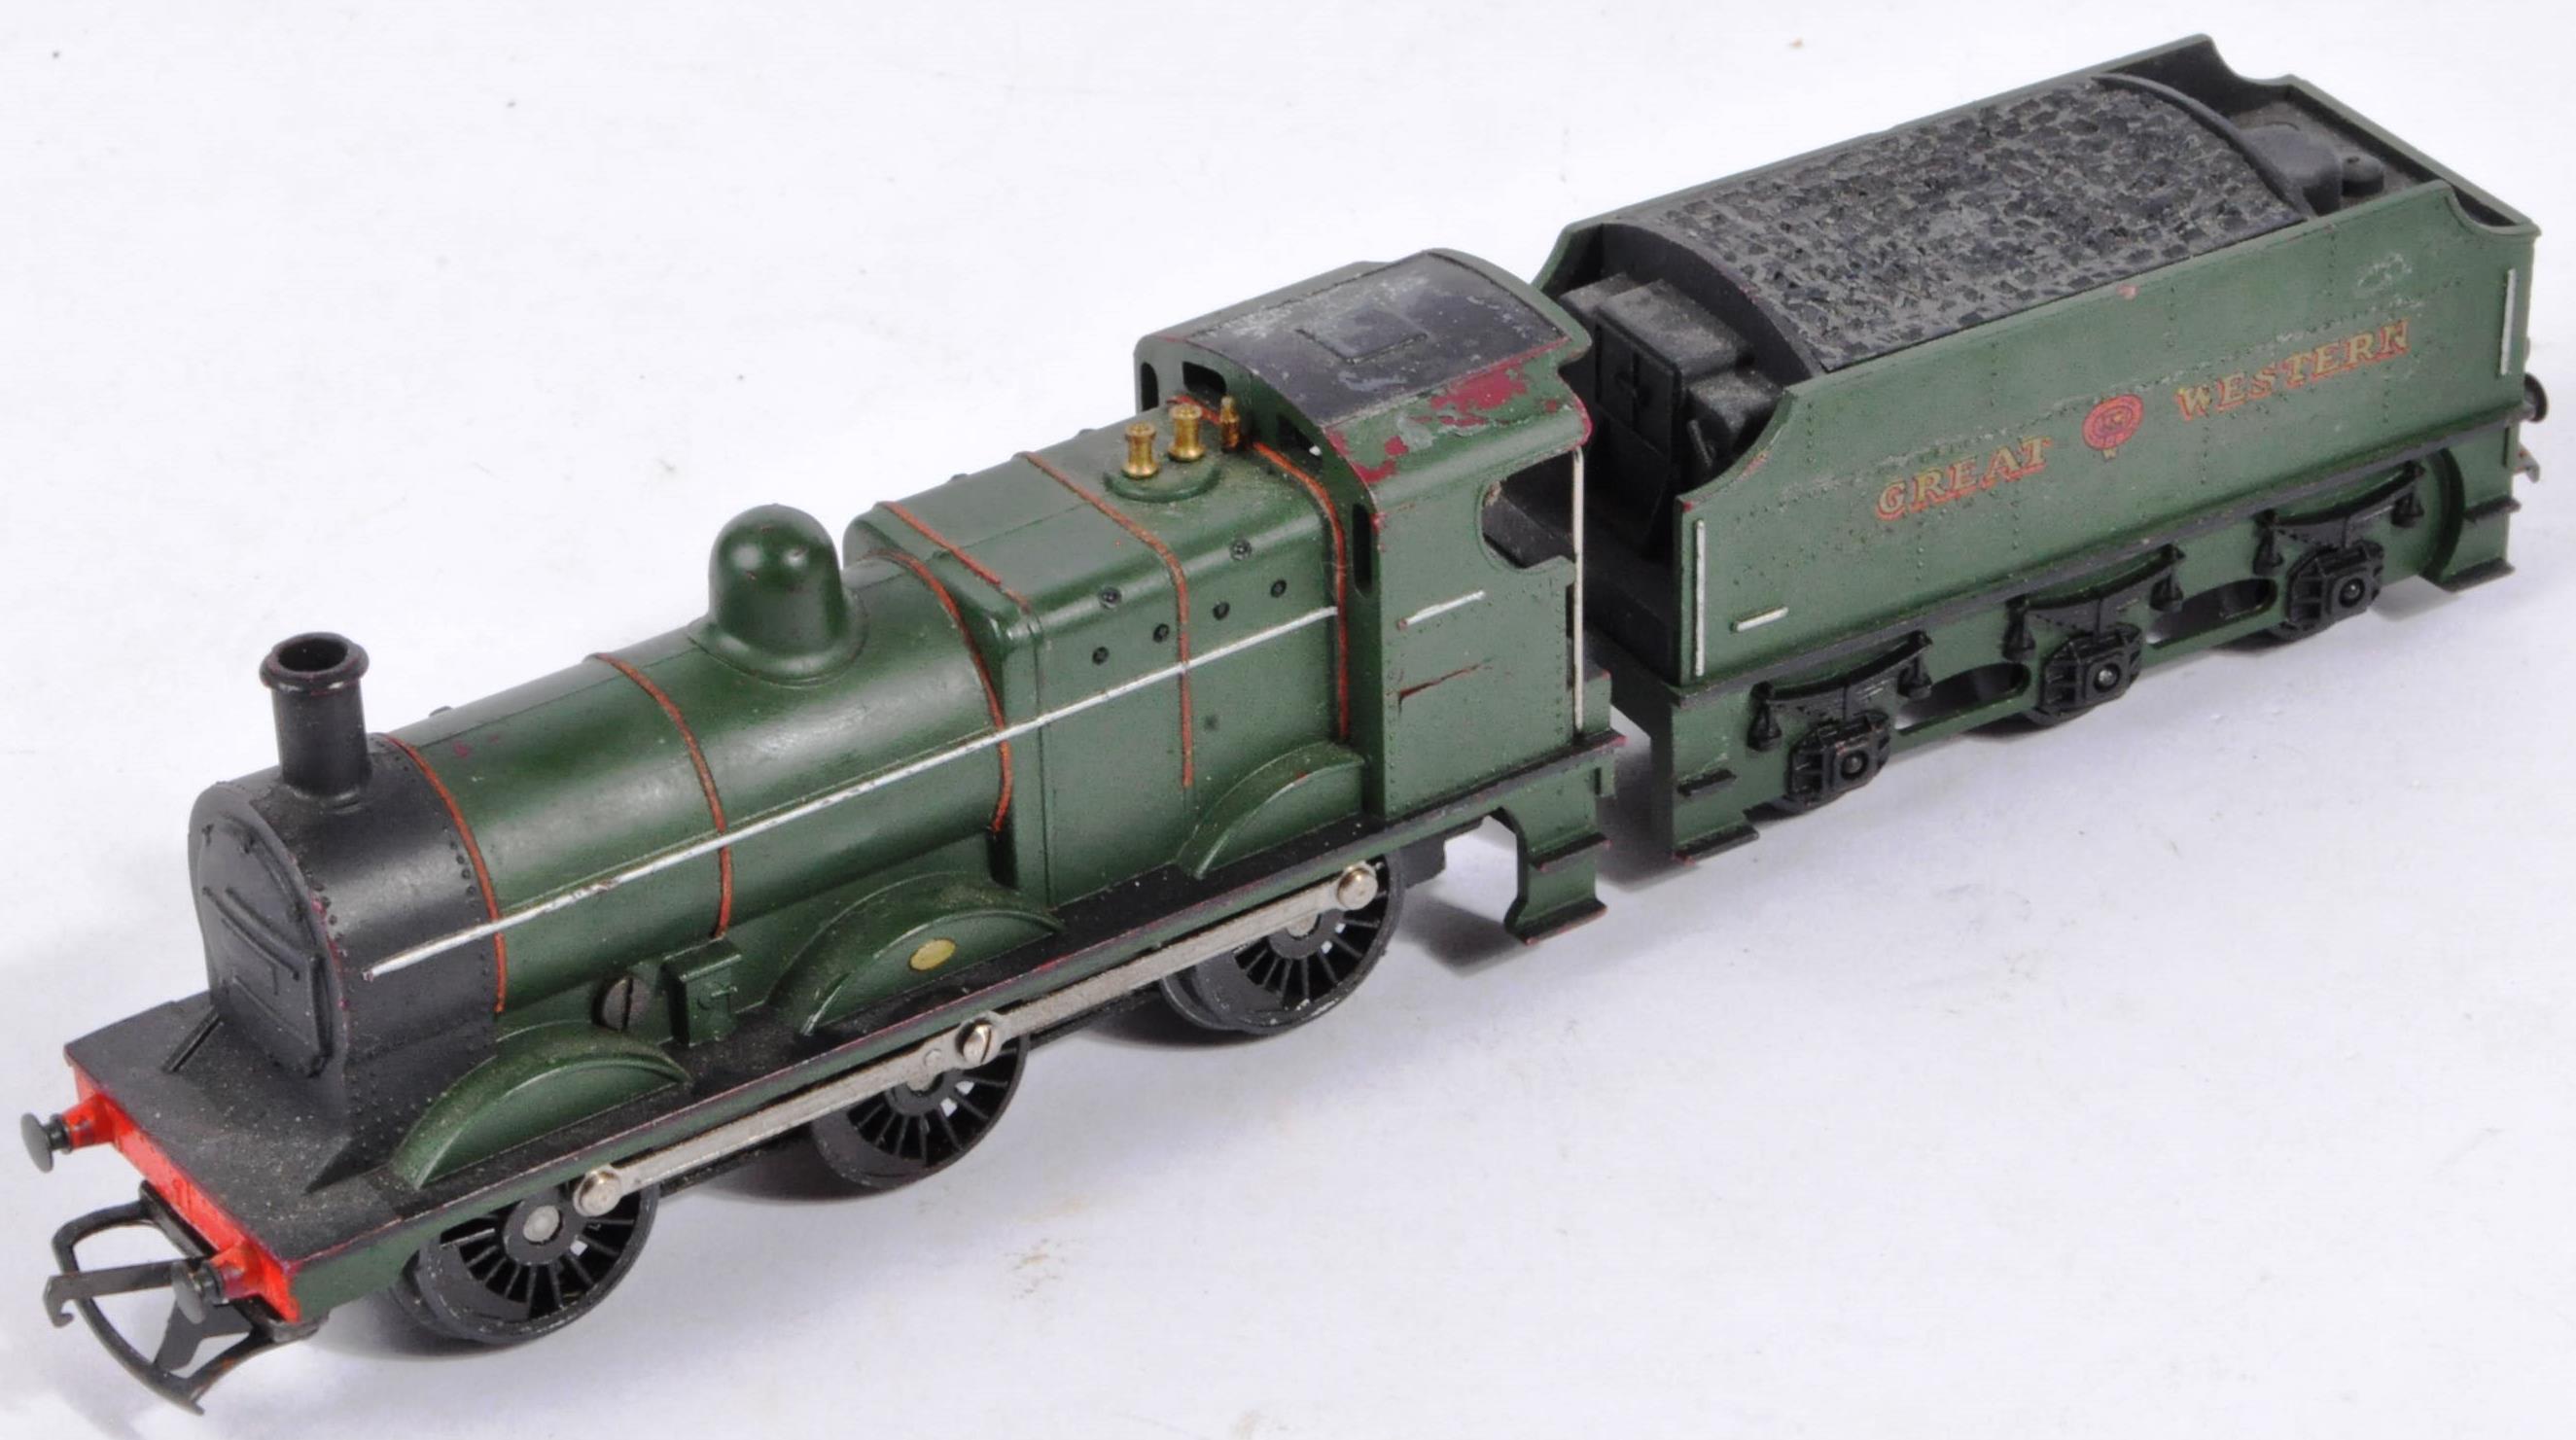 COLLECTION OF HORNBY / TRIANG TRAIN SET LOCOMOTIVE ENGINES - Image 5 of 8